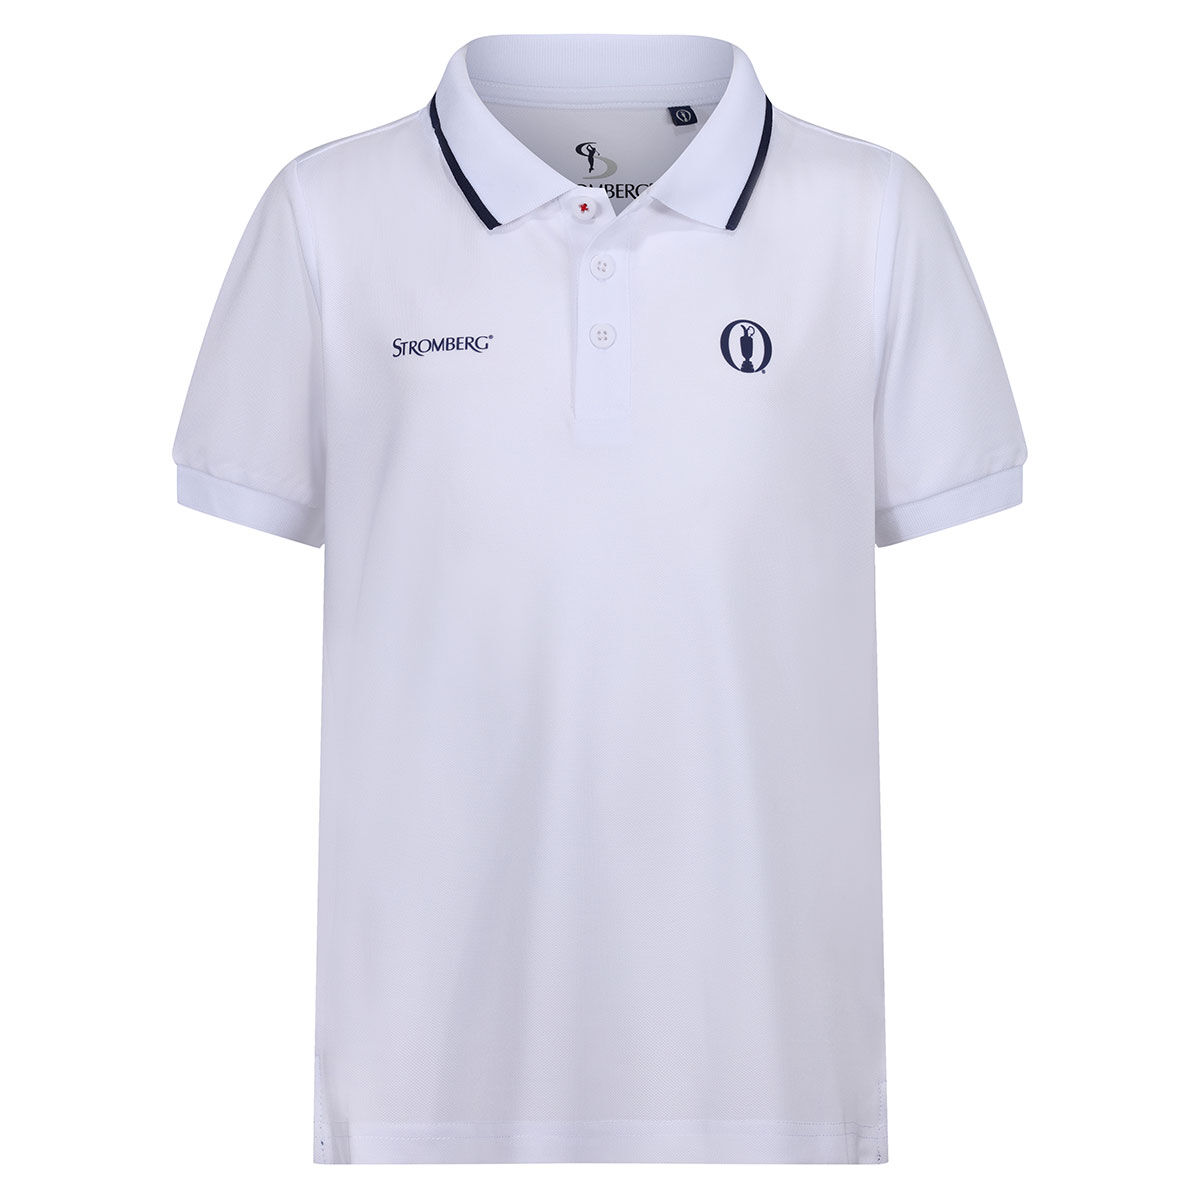 Stromberg Junior The Open Harbour Stretch Golf Polo Shirt, Unisex, Optic white, 10-11 years | American Golf